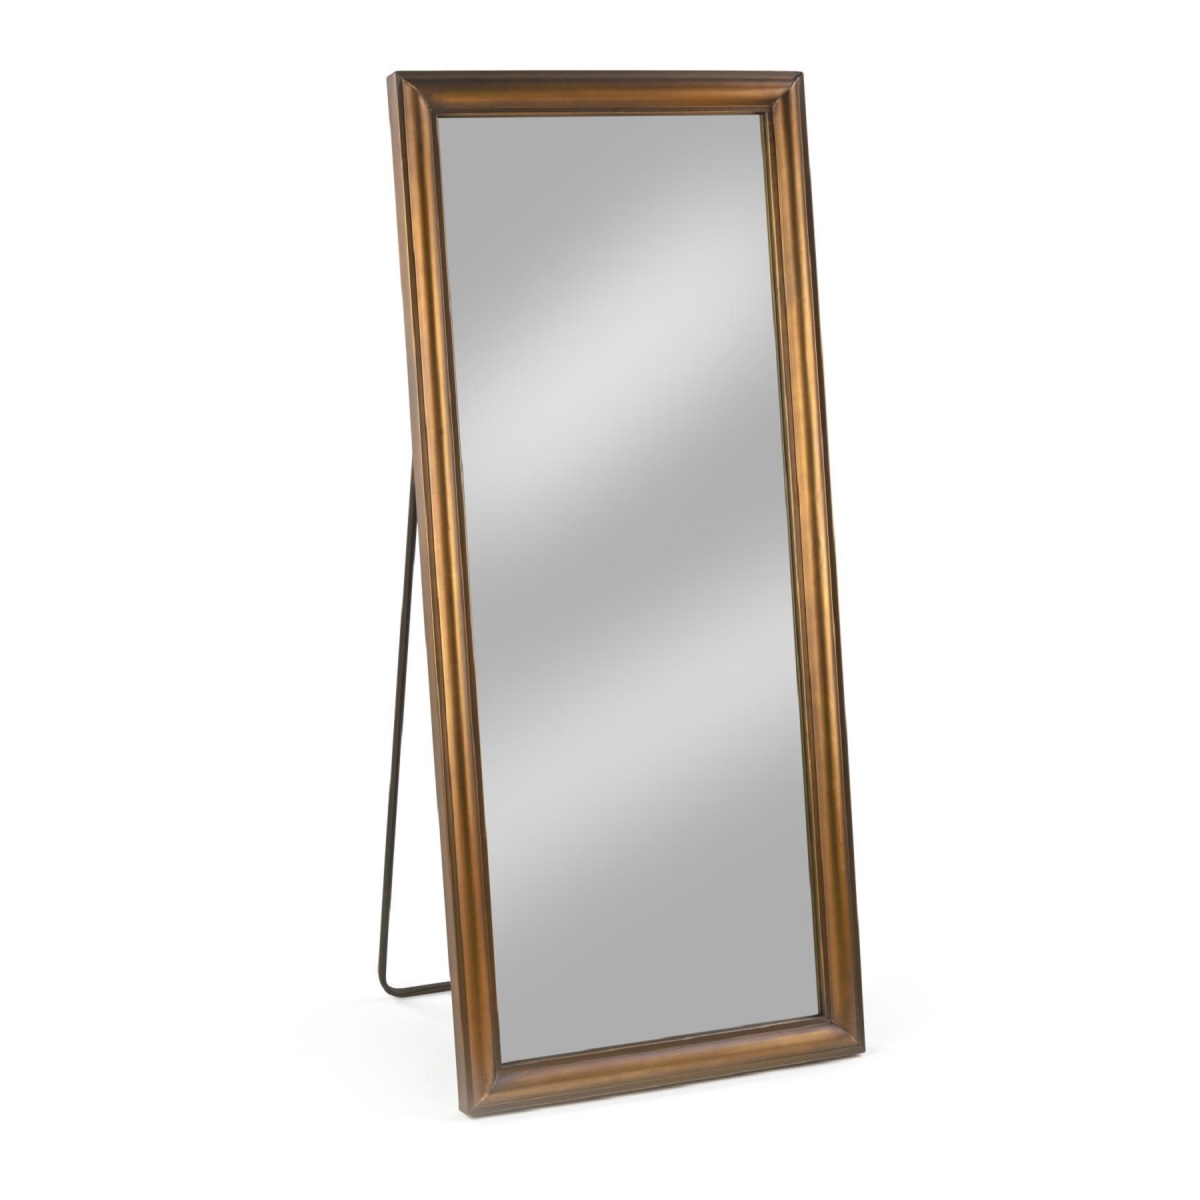 Picture of Tripar 21576 55 in. Framed Floor Mirror with Easel Back, Gold